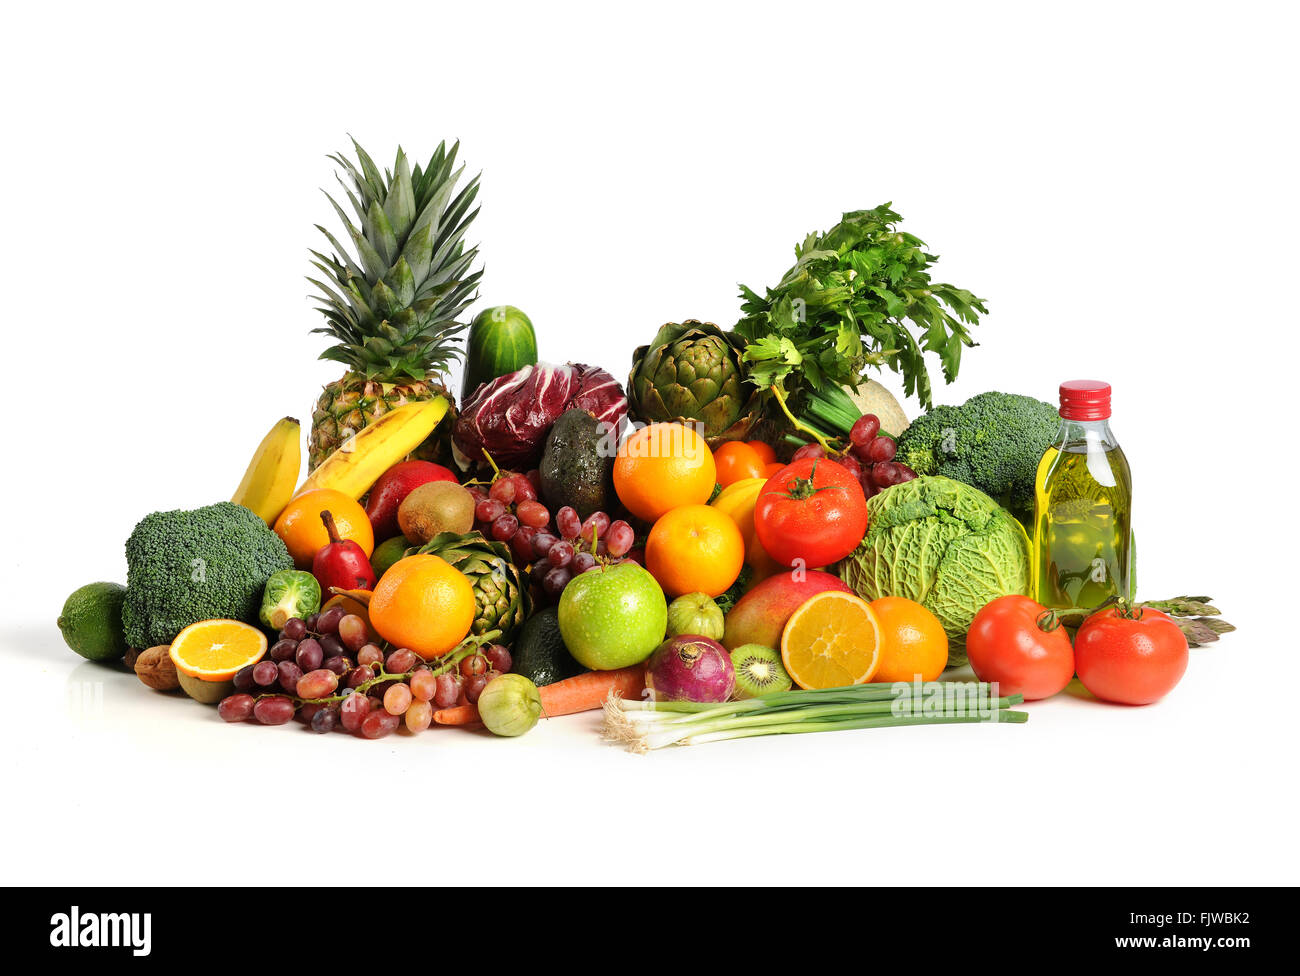 Fresh fruits and vegetables with olive oil on table isolated over white background Stock Photo